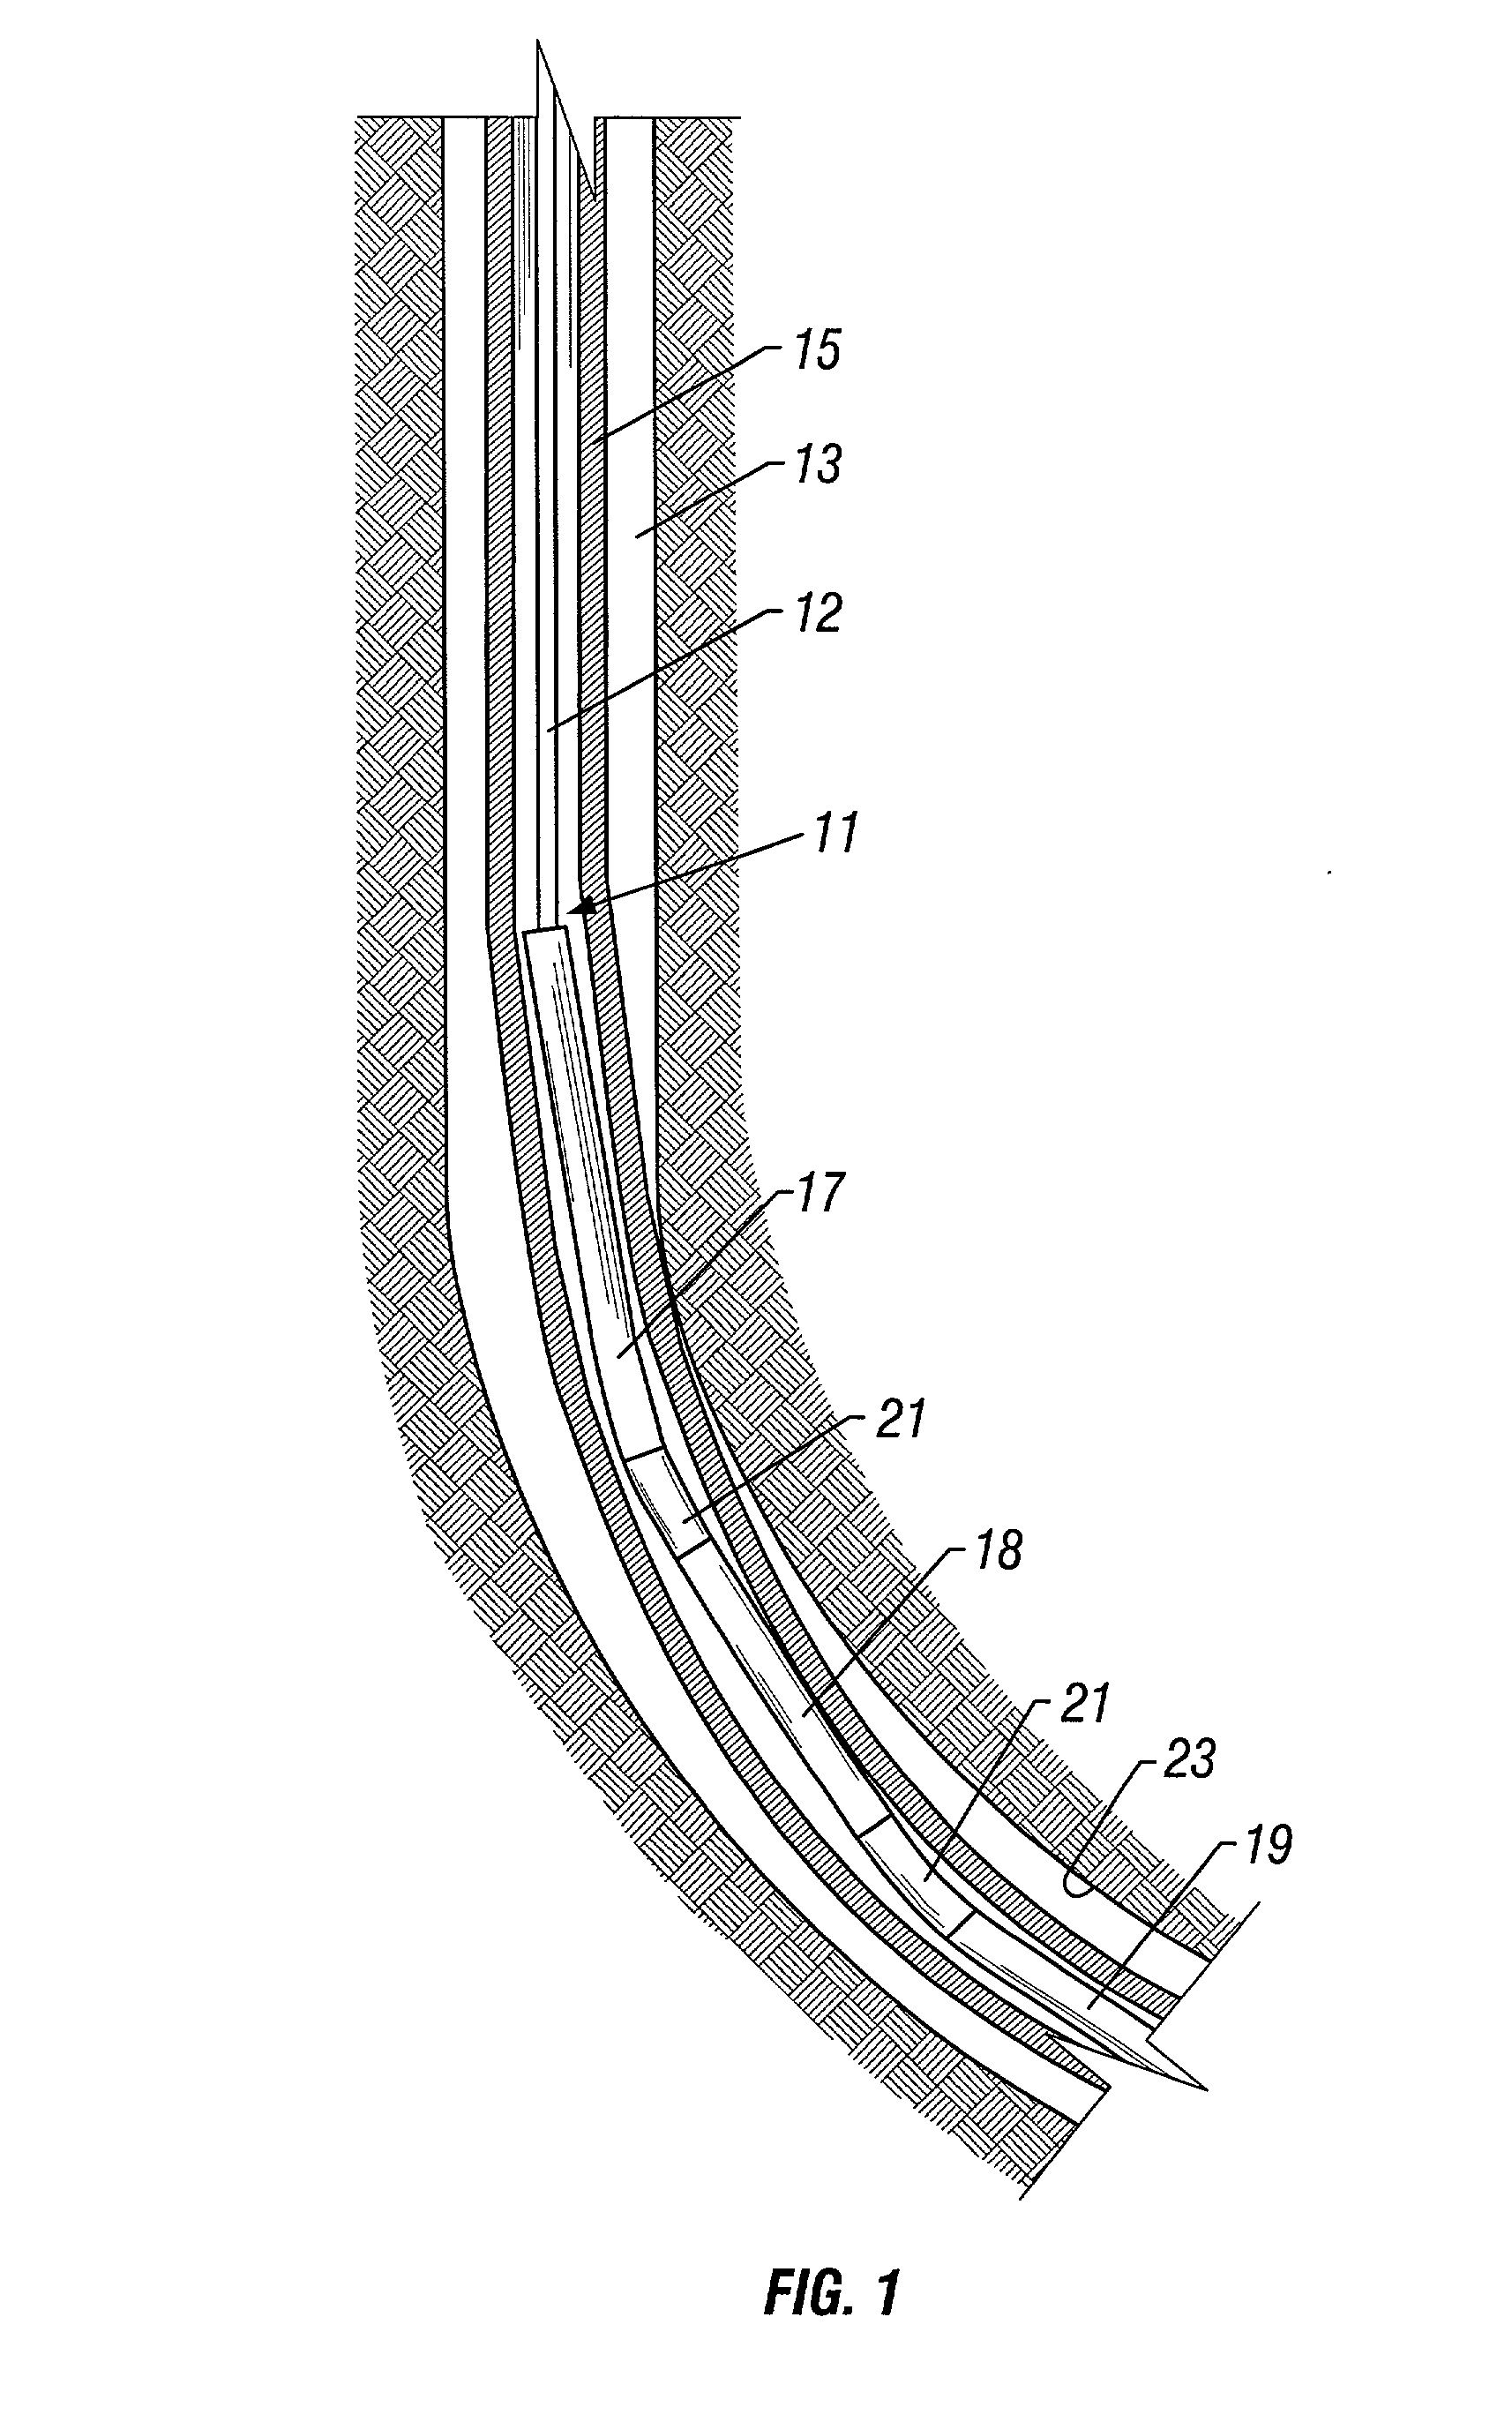 Flexible joint for well logging instruments